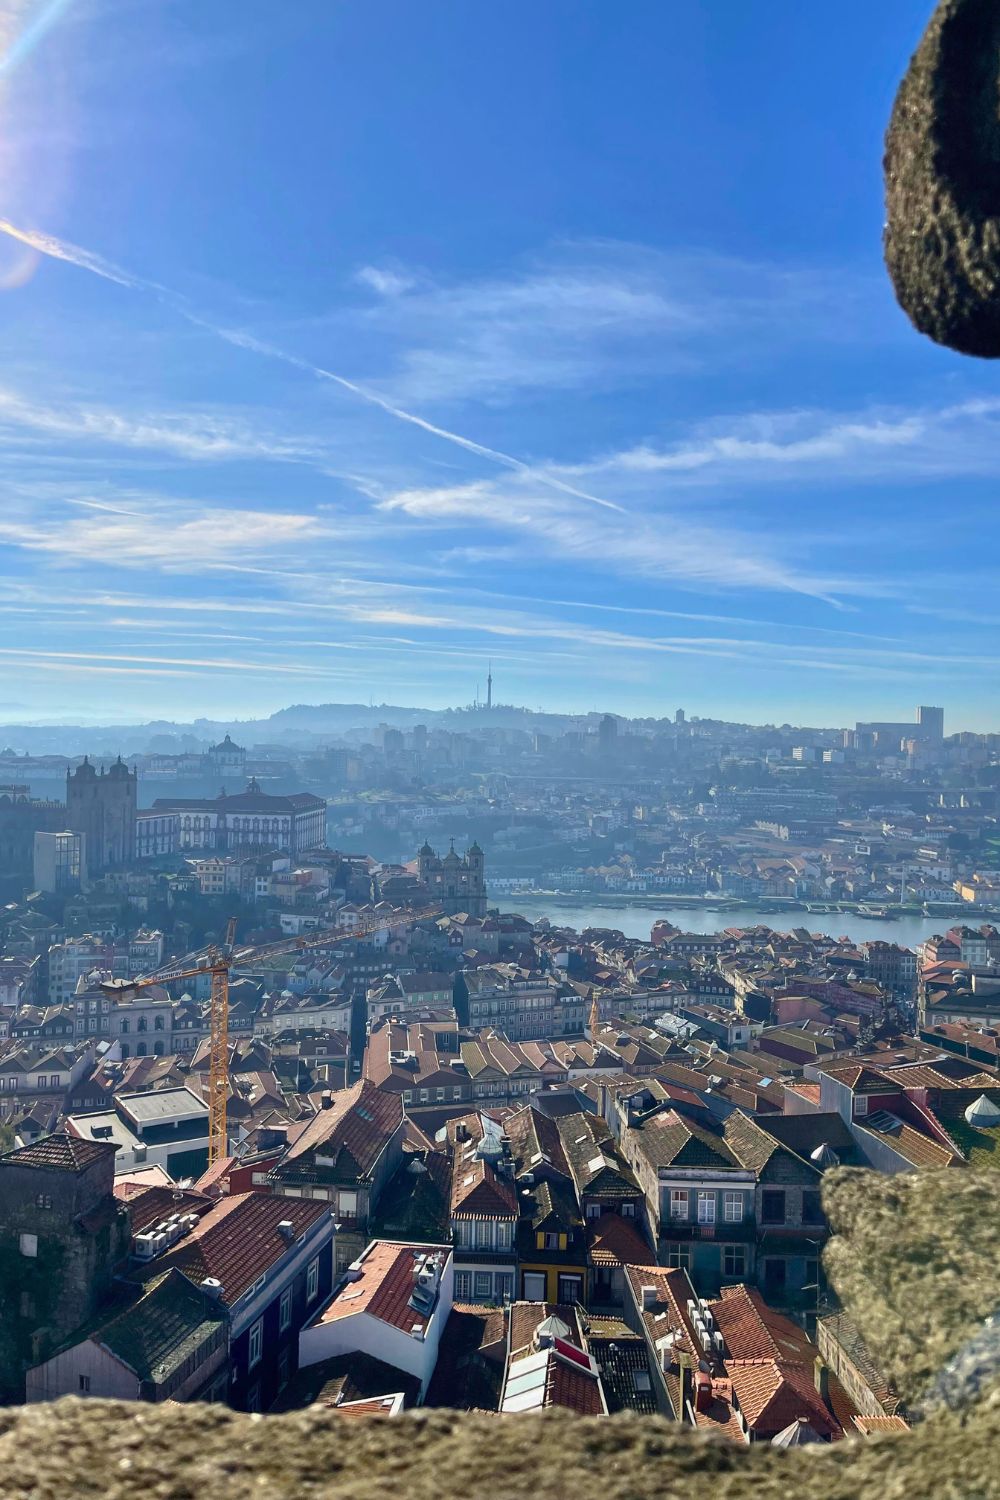 Scenic overlook of Porto's dense historic architecture and the Douro River, under a hazy blue sky with soft clouds, as seen from a high vantage point.